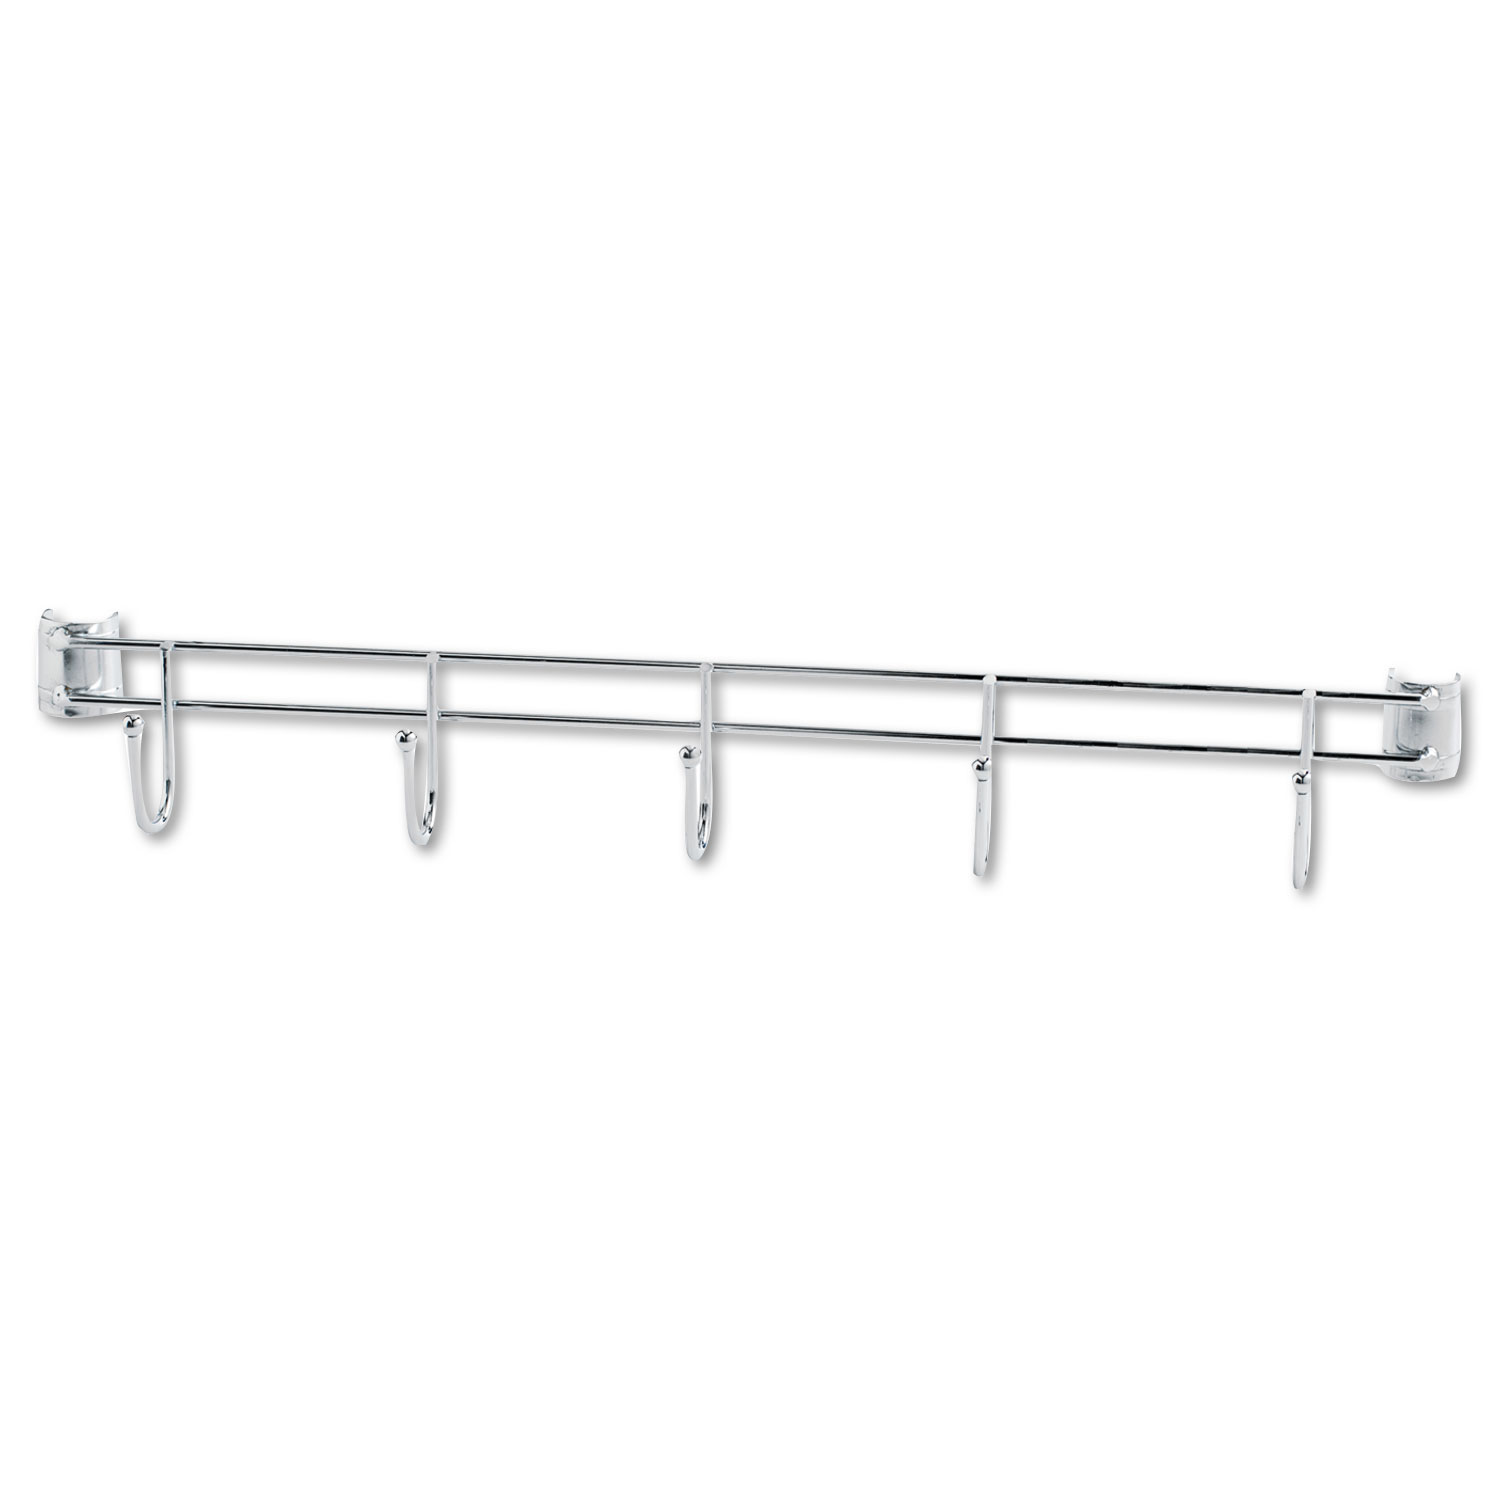  Alera ALESW59HB424SR Hook Bars For Wire Shelving, Five Hooks, 24 Deep, Silver, 2 Bars/Pack (ALESW59HB424SR) 